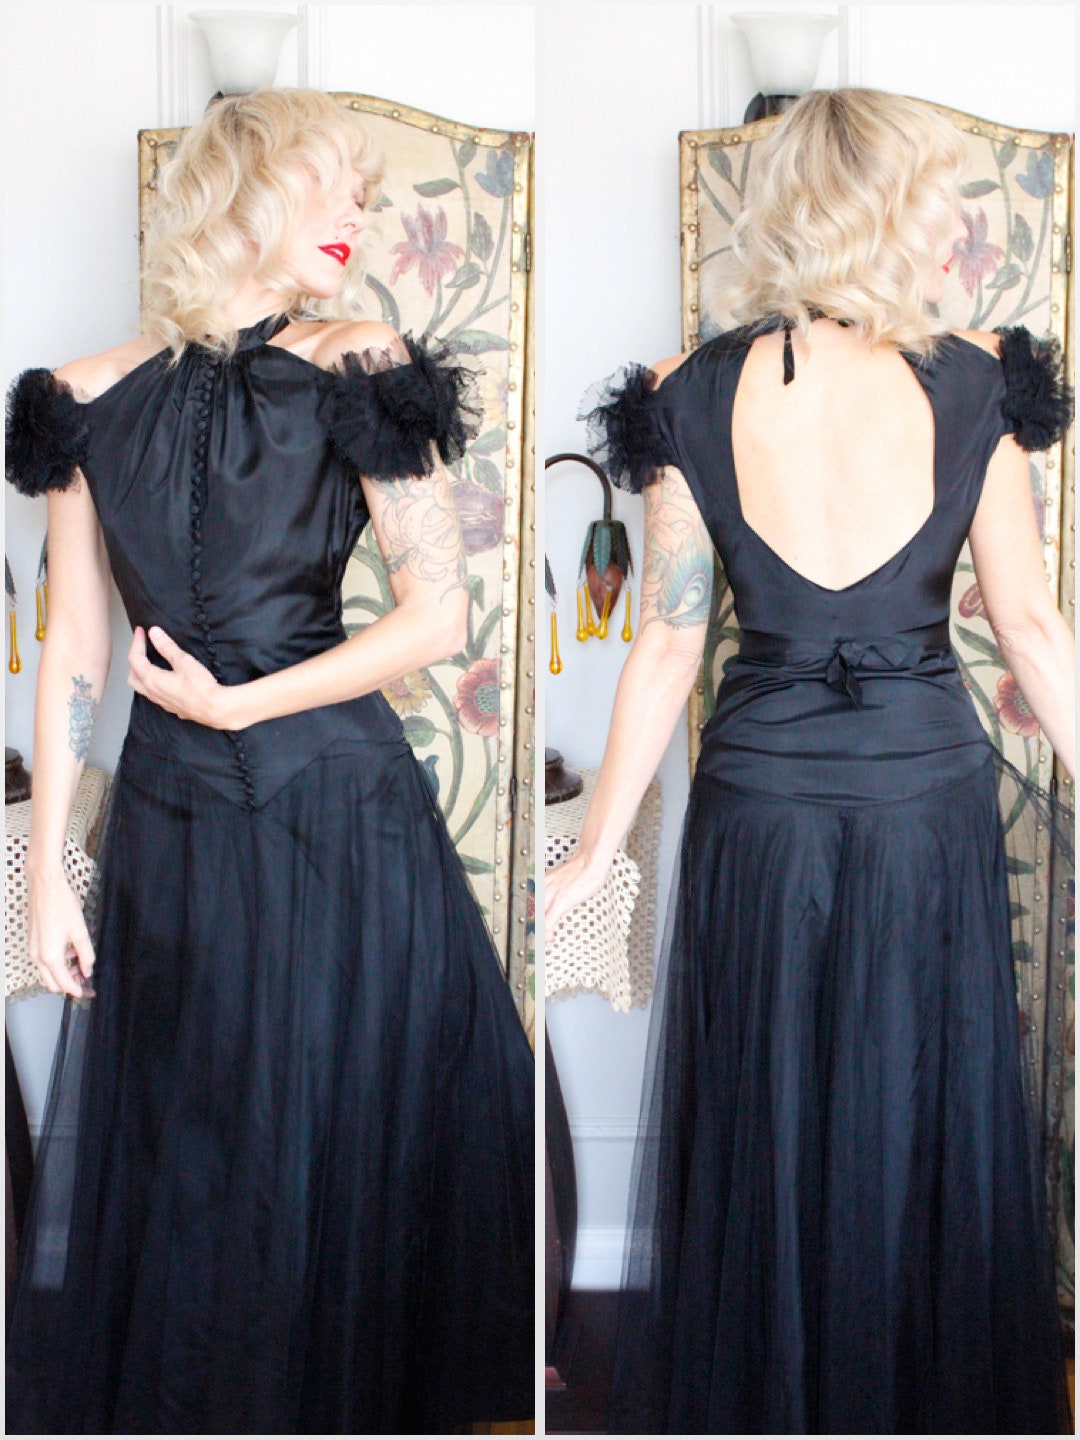 1930s Glamorous Starlette's Black Netted Gown - Xs/S